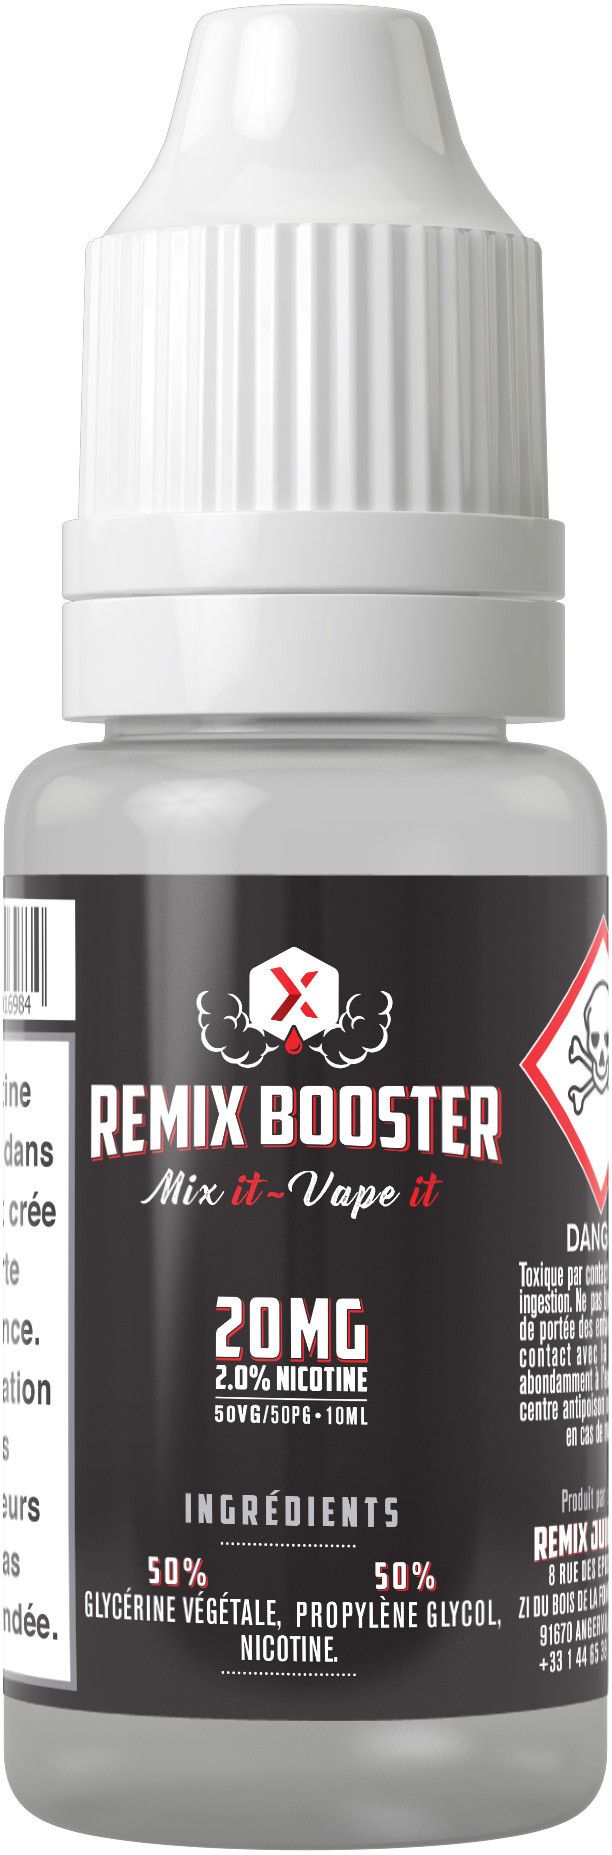 Booster de Nicotine Remix Booster - J WELL